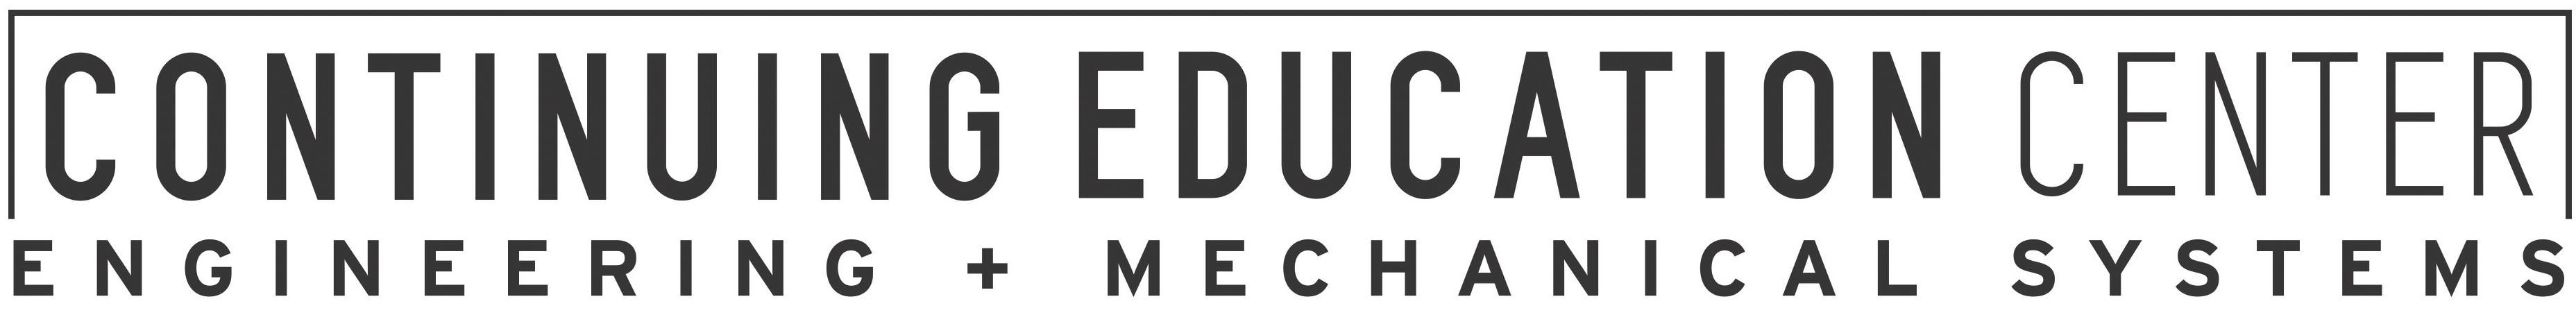 Trademark Logo CONTINUING EDUCATION CENTER ENGINEERING + MECHANICAL SYSTEMS